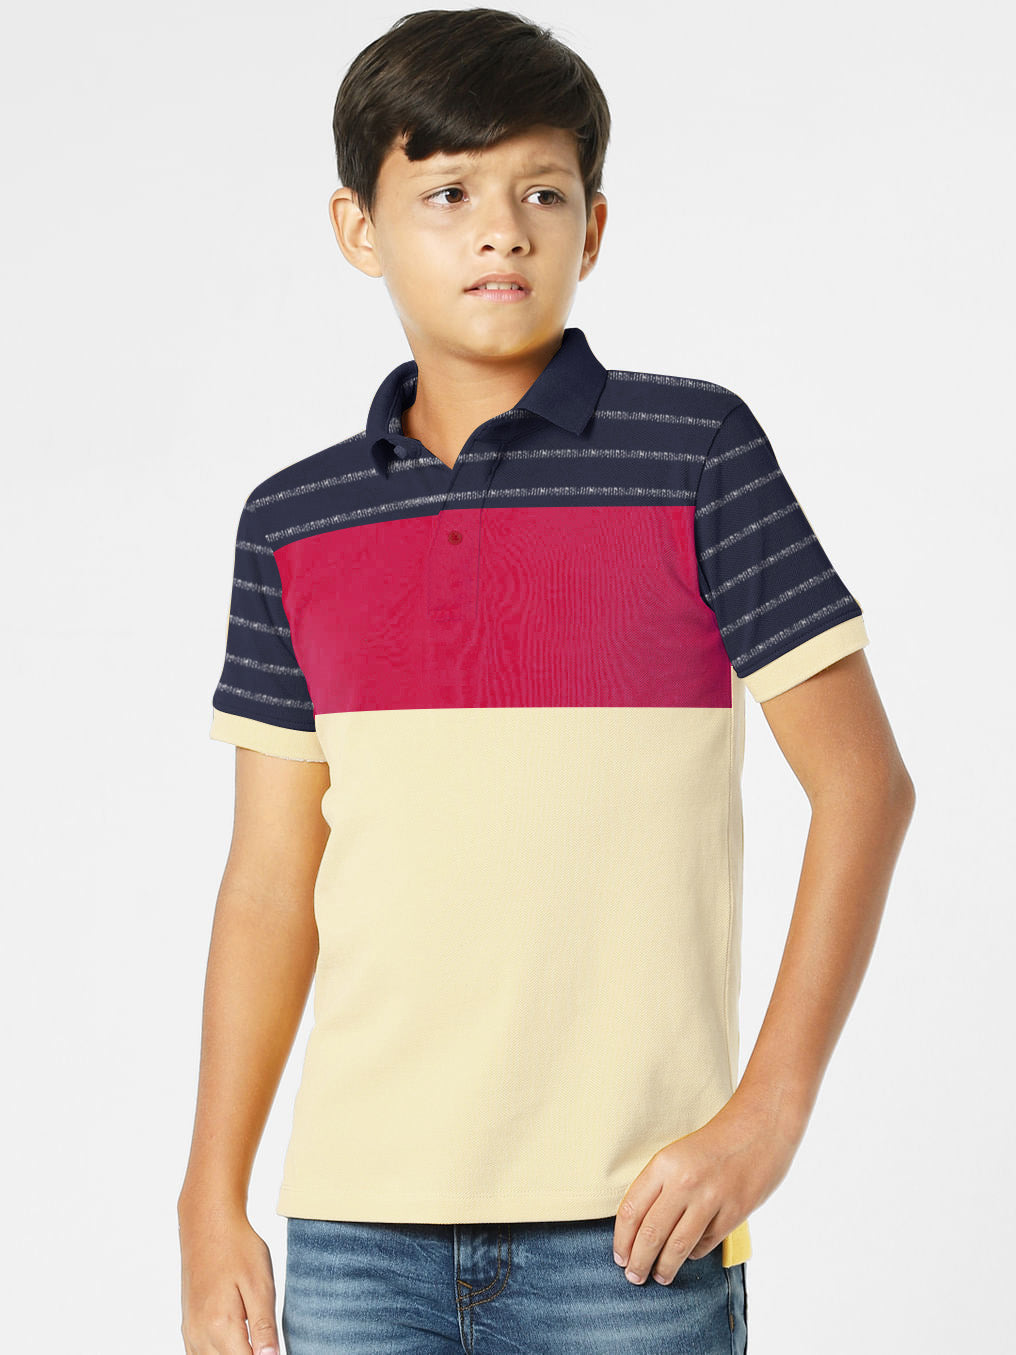 NXT Summer P.Q Polo Shirt For Kids-Off White with Pink & Dark Navy-BE938/BR13185